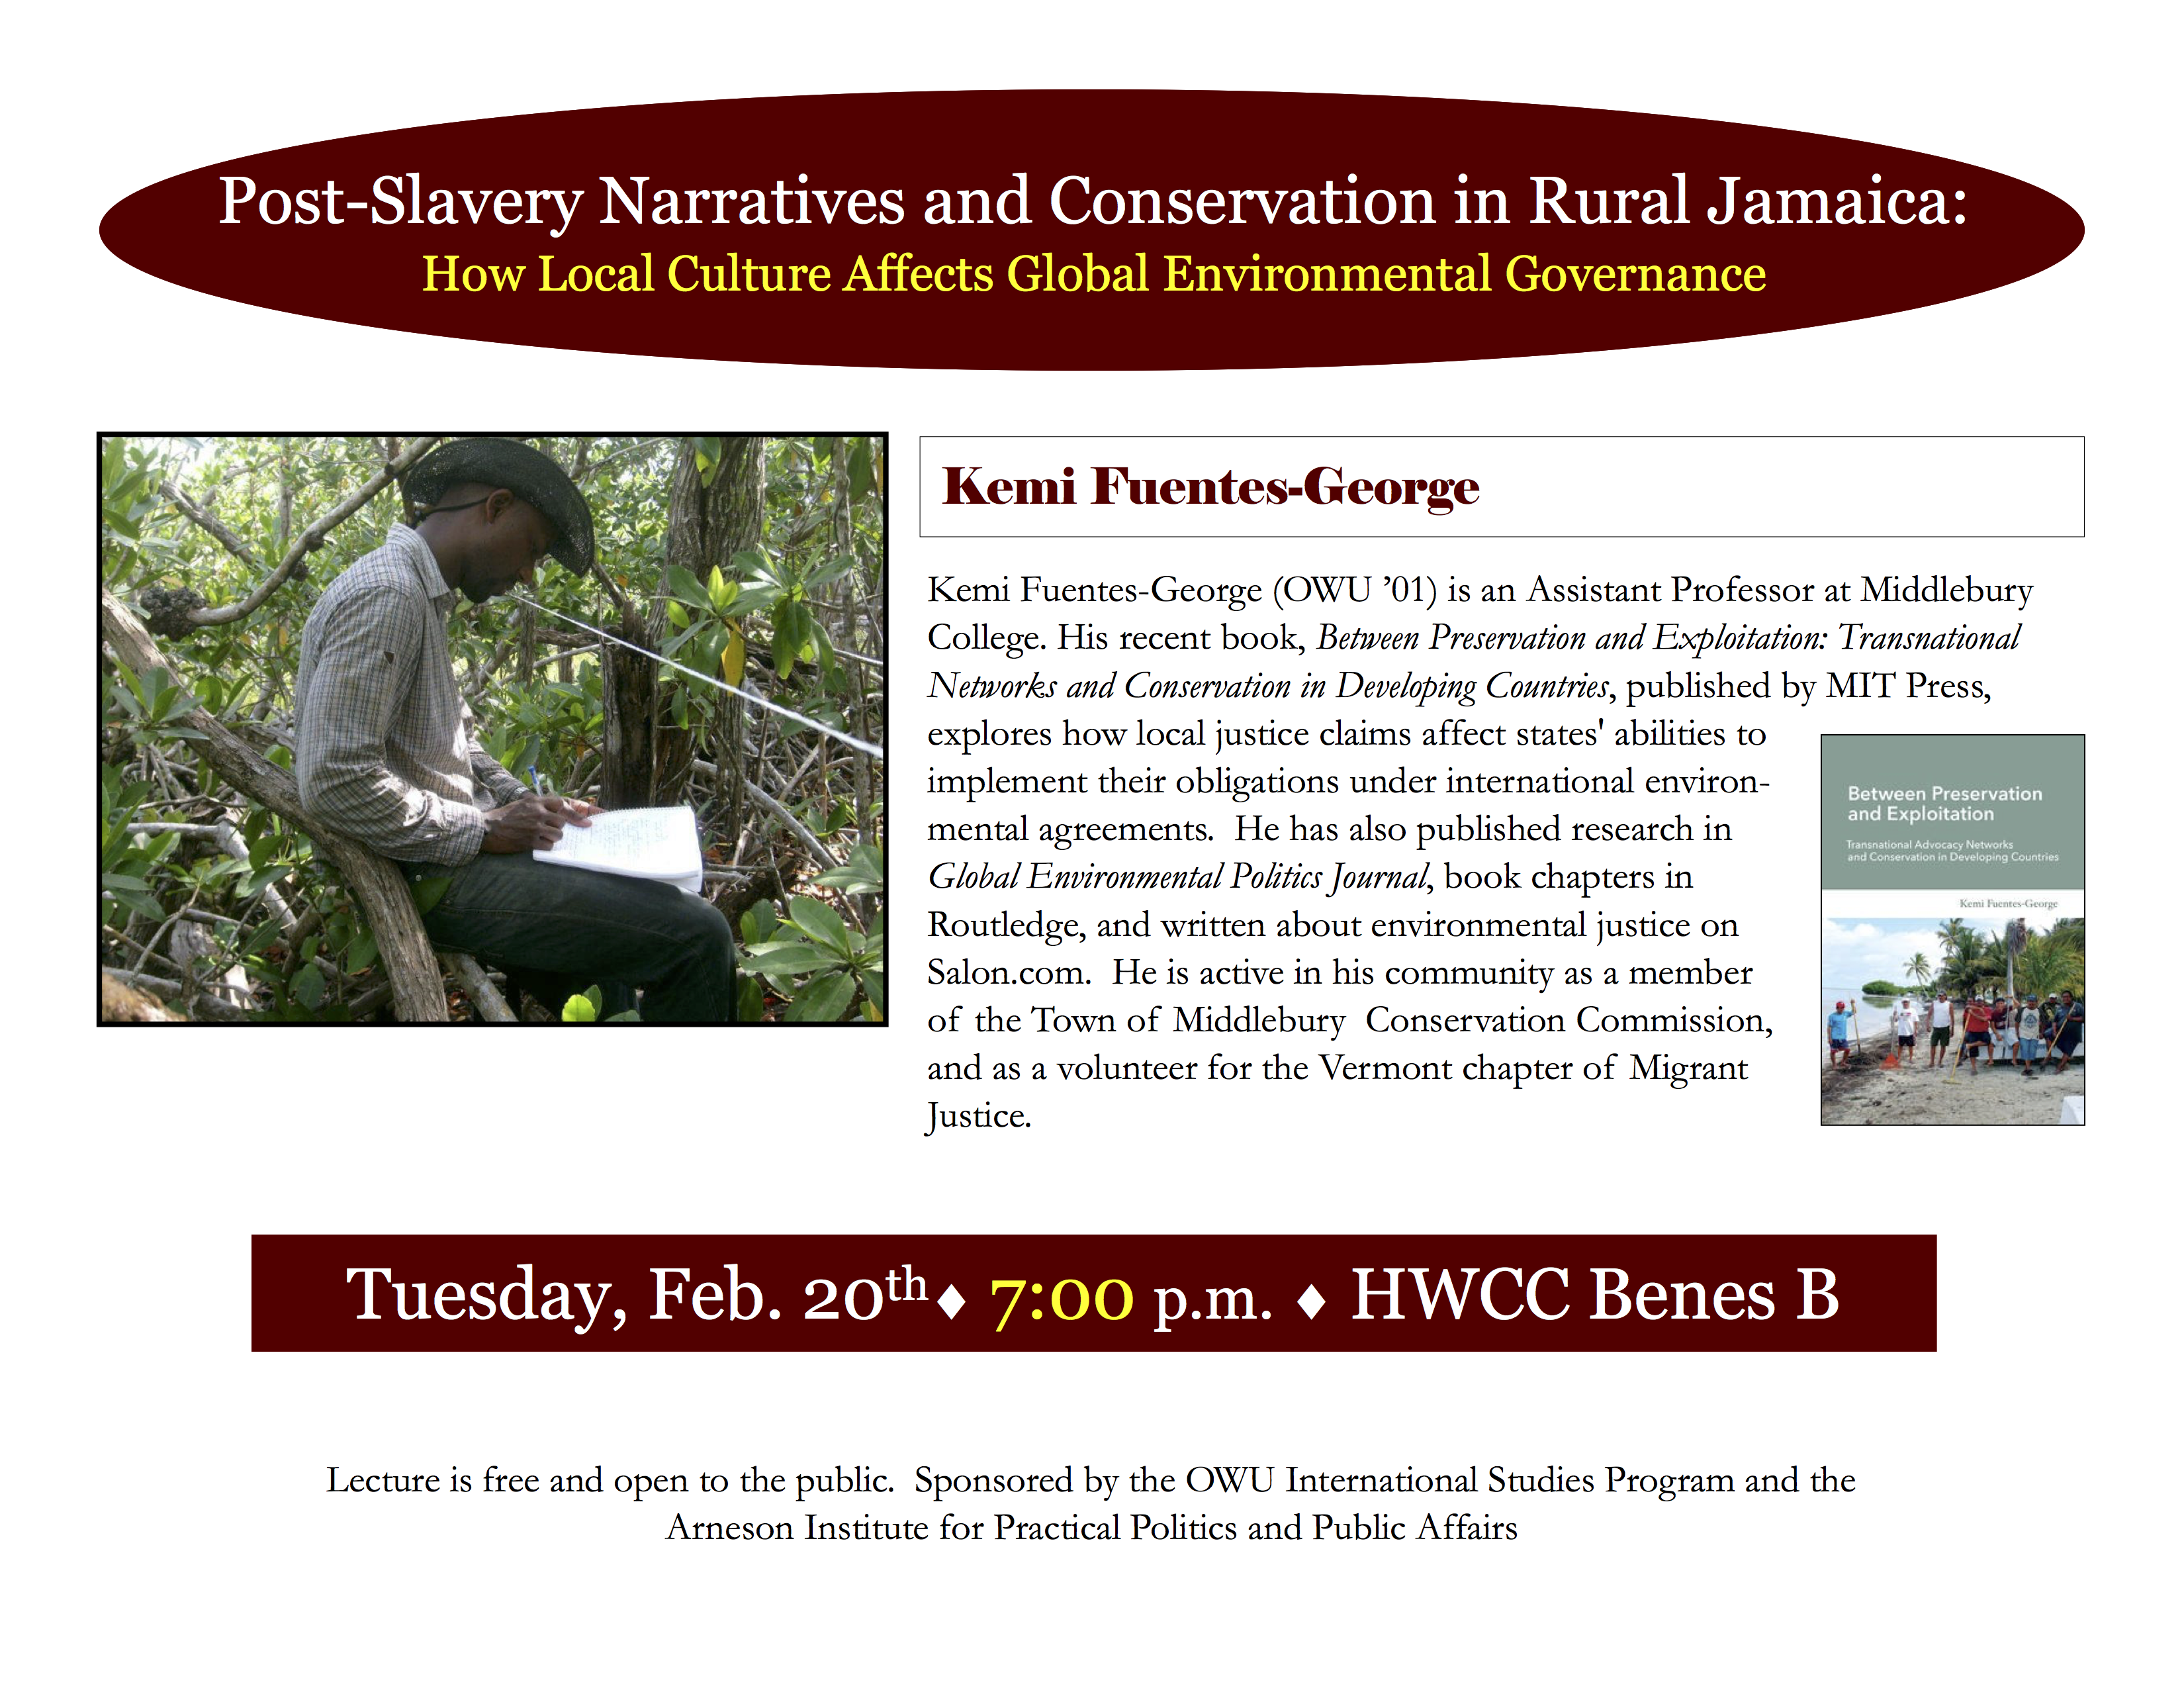 OWU Talk Feb. 20: Kemi Fuentes-George (OWU ’01): Post-Slavery Narratives and Conservation in Rural Jamaica